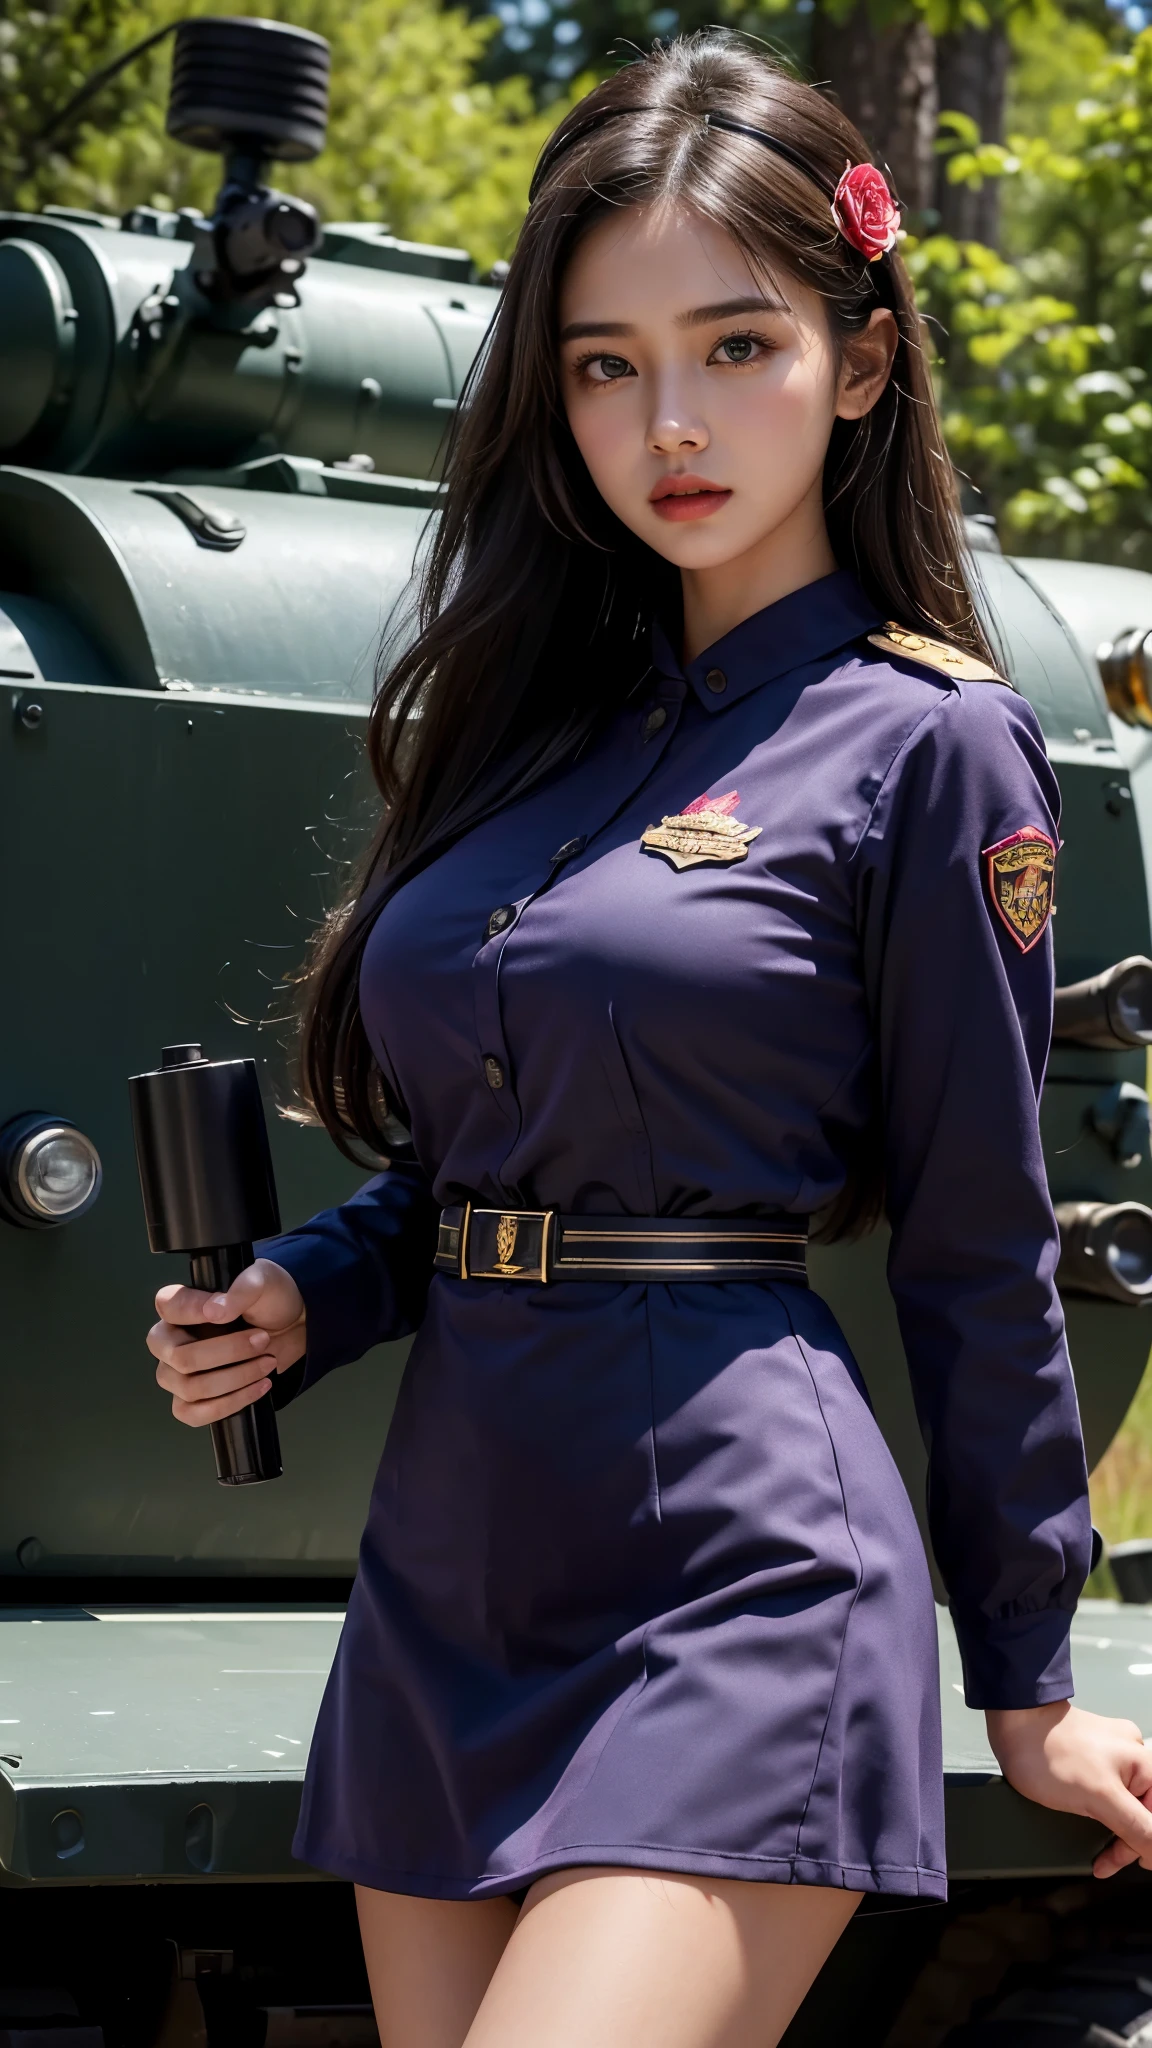 8k, highest quality, ultra detailed:1.37), Eliana, ((18 years)), a beautiful Asian girl, ((proudly stands in a military uniform)), representing her role as a soldier, ((She wears a fitted Purple dress)), The high-resolution image captures ultra-detailed realism, highlighting Eliana's determined expression, piercing eyes, and confident stance. The backdrop showcases an forest, adding to the authenticity and significance of the image. This visually striking representation showcases Eliana's strength and dedication as a soldier, cute knees, ((Lake)), ((Pine trees)), ((Detailed face)), ((Perfect body figure)), ((Detailed hair)), ((Detailed Dress)), Tanker, Army vehicle, ((S-500 missile launcher)), Missile fired from Launcher, k, heavy Armour vehicles, ((rose Flower in hand)), ((Super round breast under the uniform)), Hot lips, Stylish look, (Black hair), hairpin, Hairband 